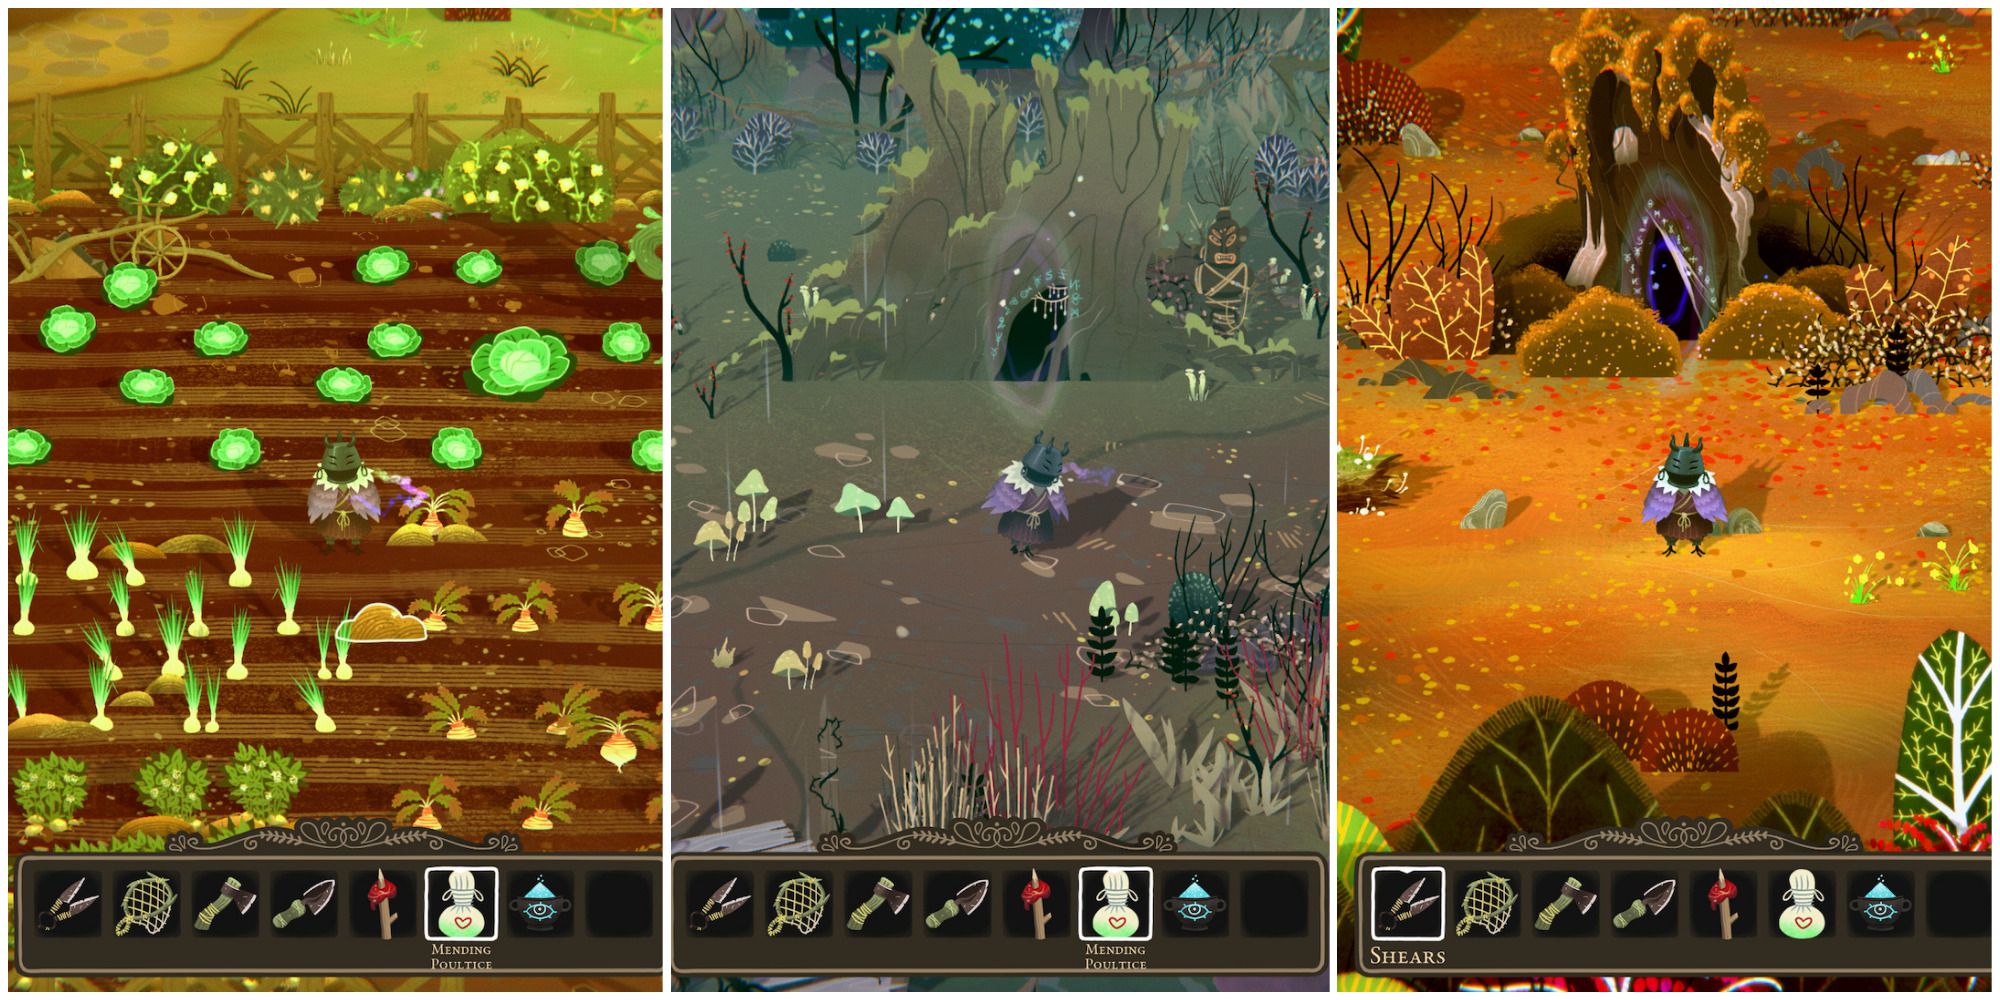 wytchwood farm fields area, witch in swamp area, witch in forest area featured